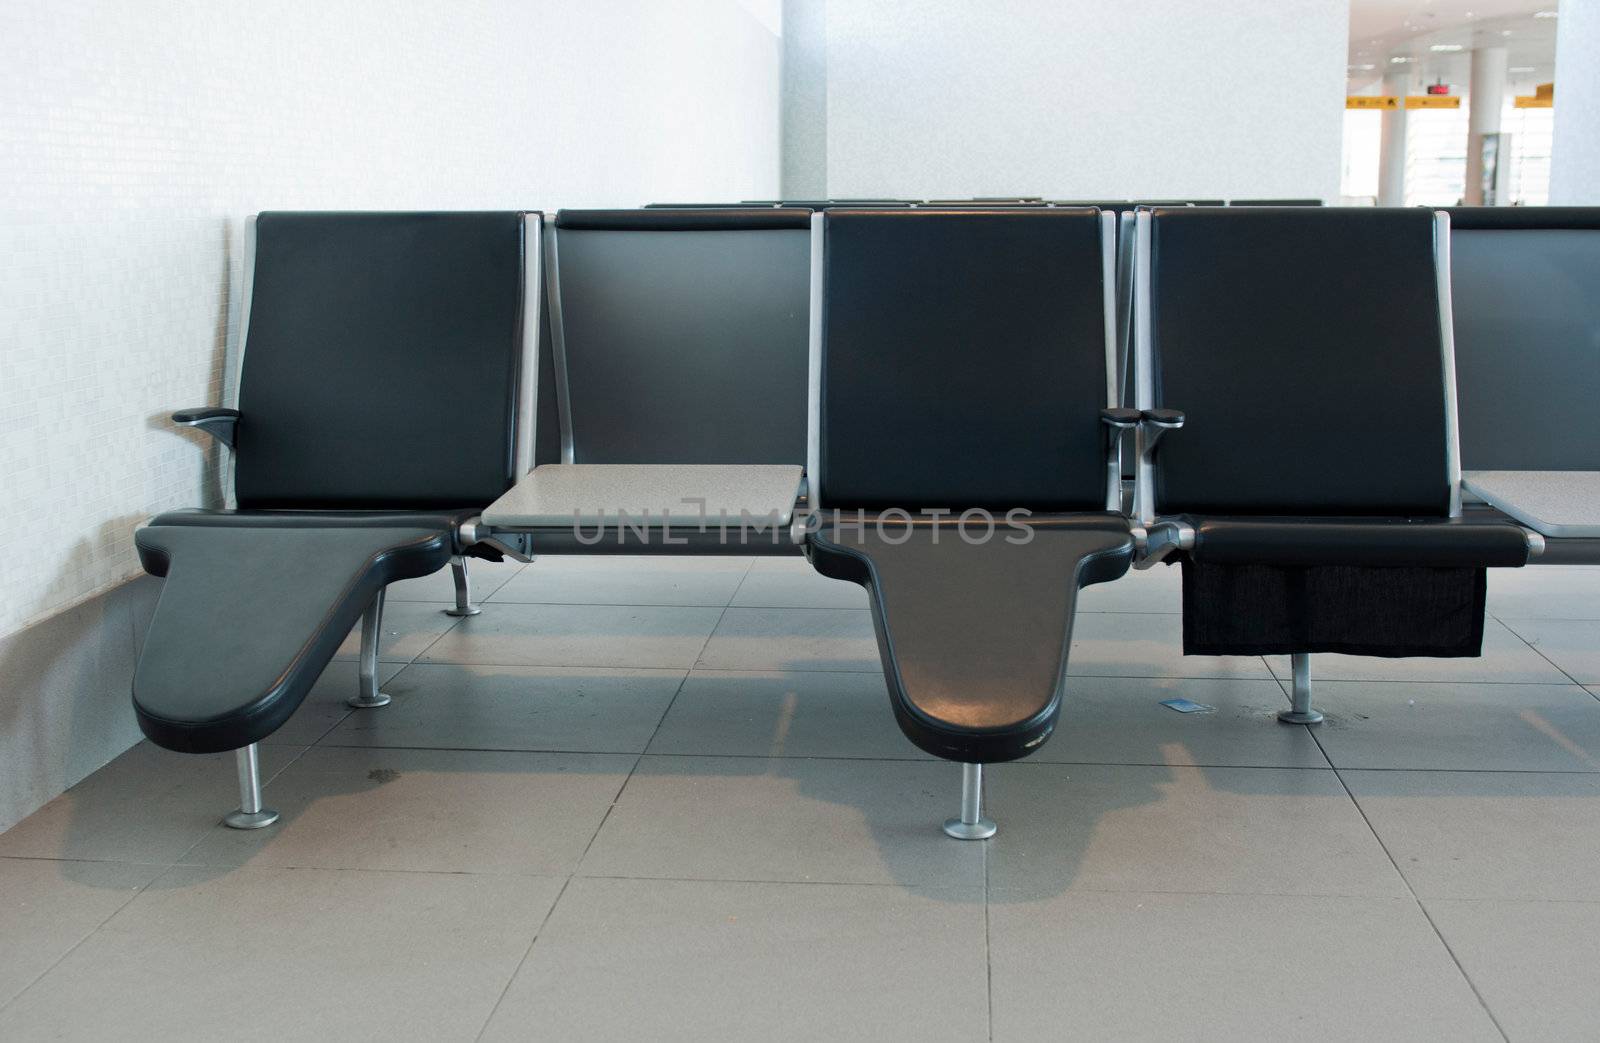 Airport seats by luissantos84